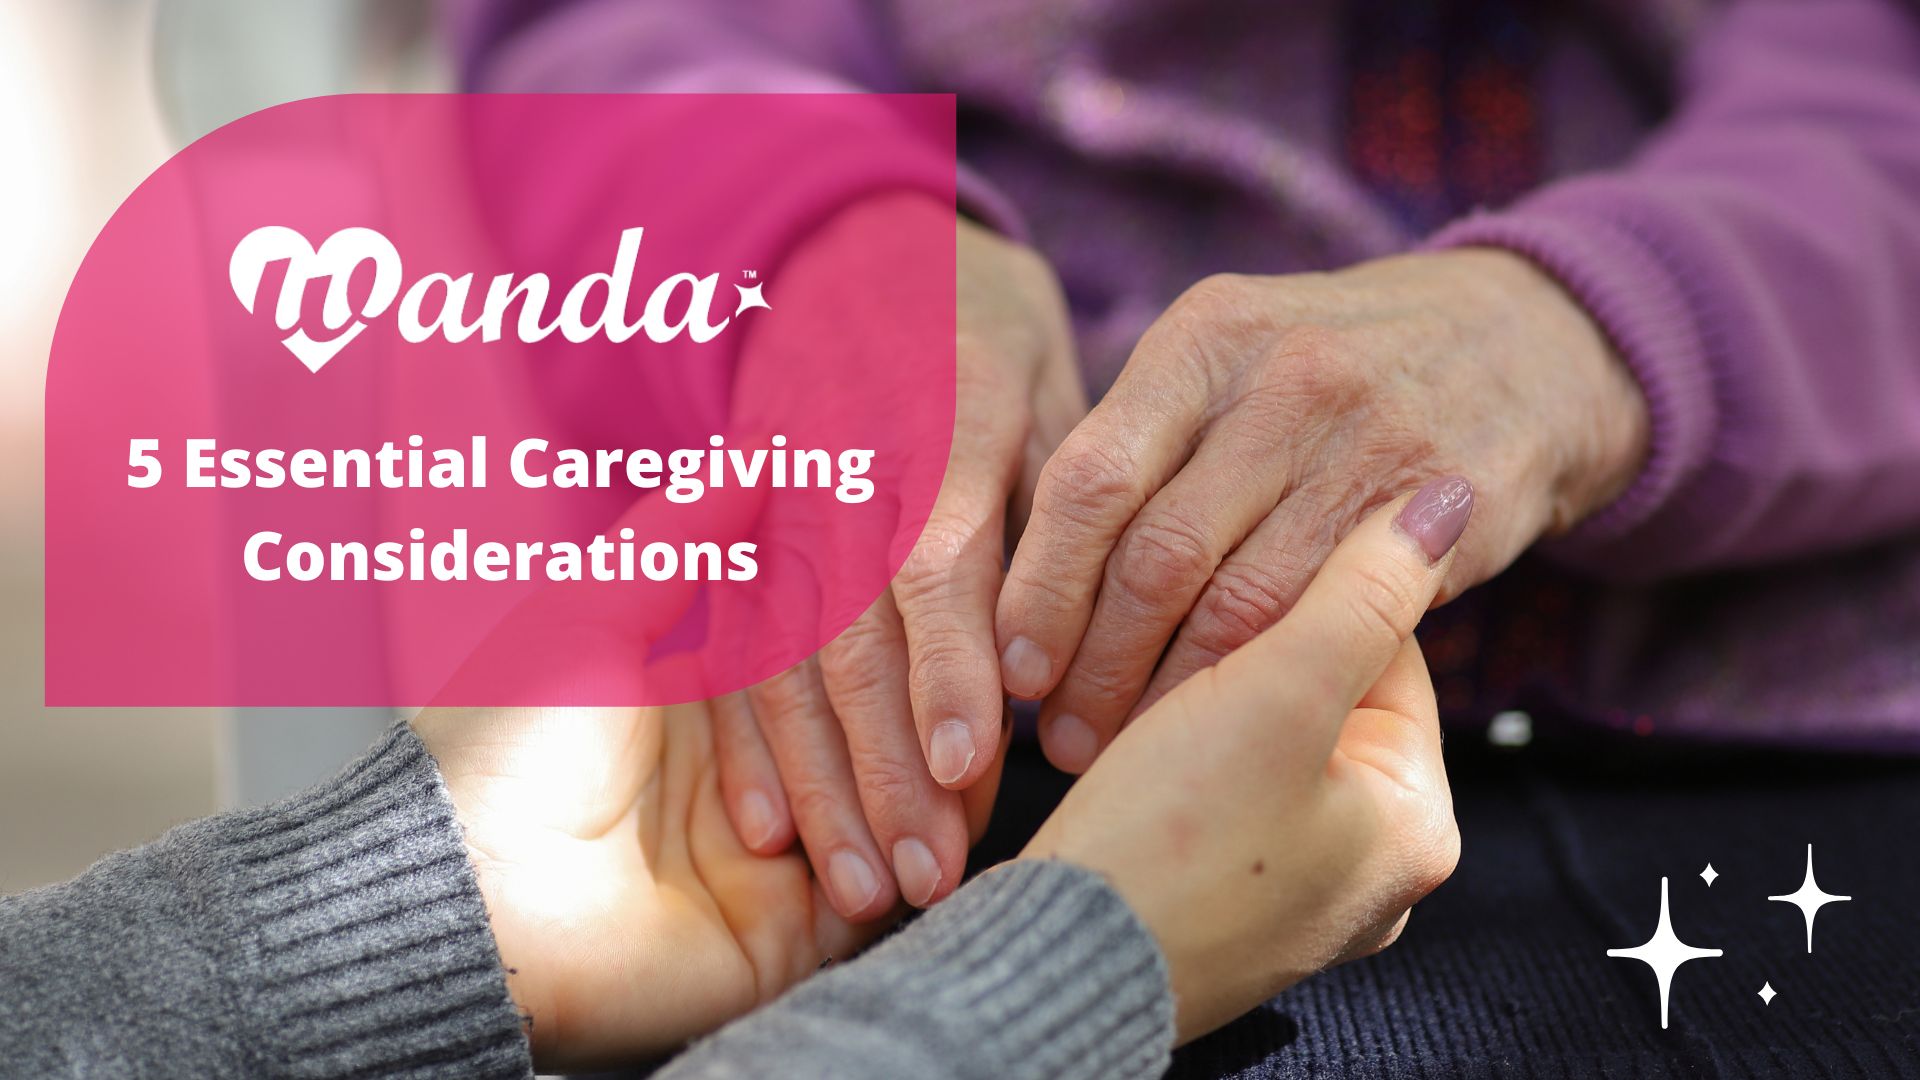 Caring for aging parents? Plan ahead to ensure a smooth aging process! Learn how Wanda’s aging-in-place solutions support you and loved ones.